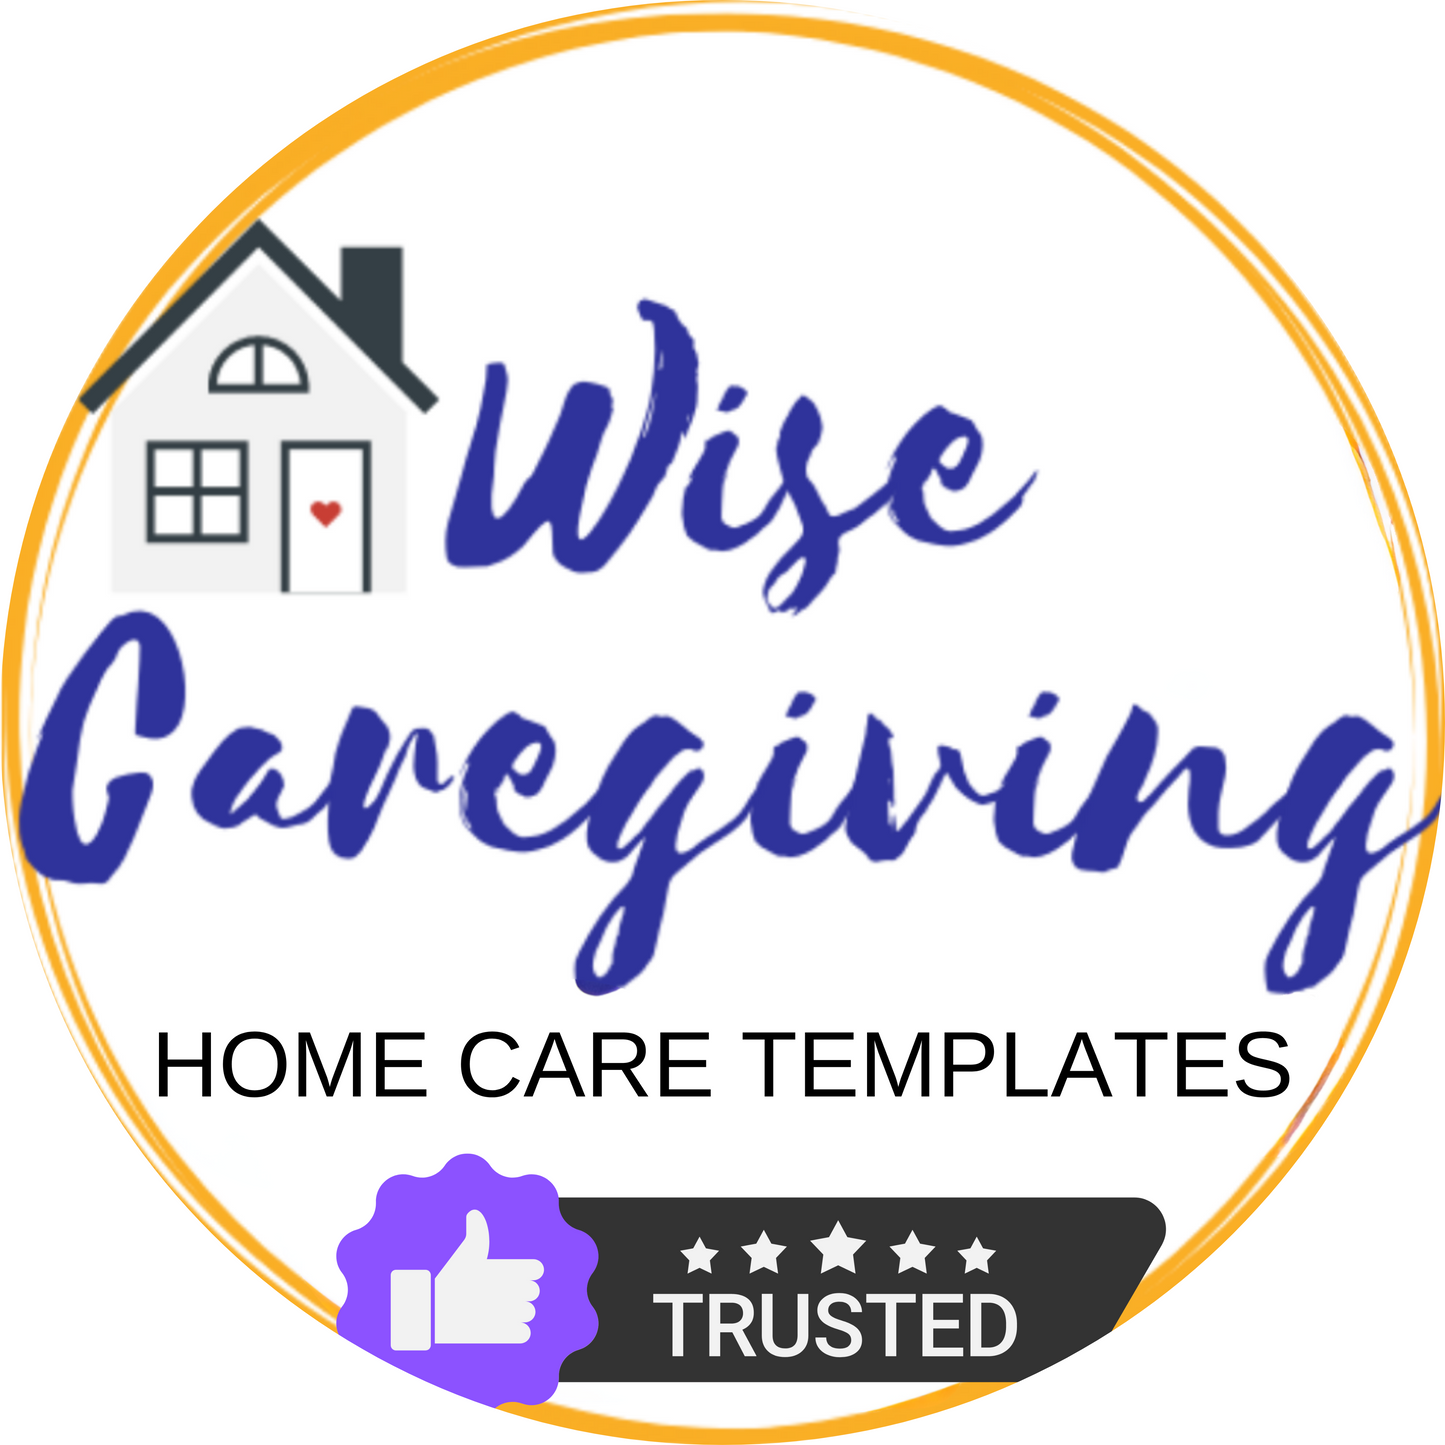 Caregiver Competency Evaluation Template